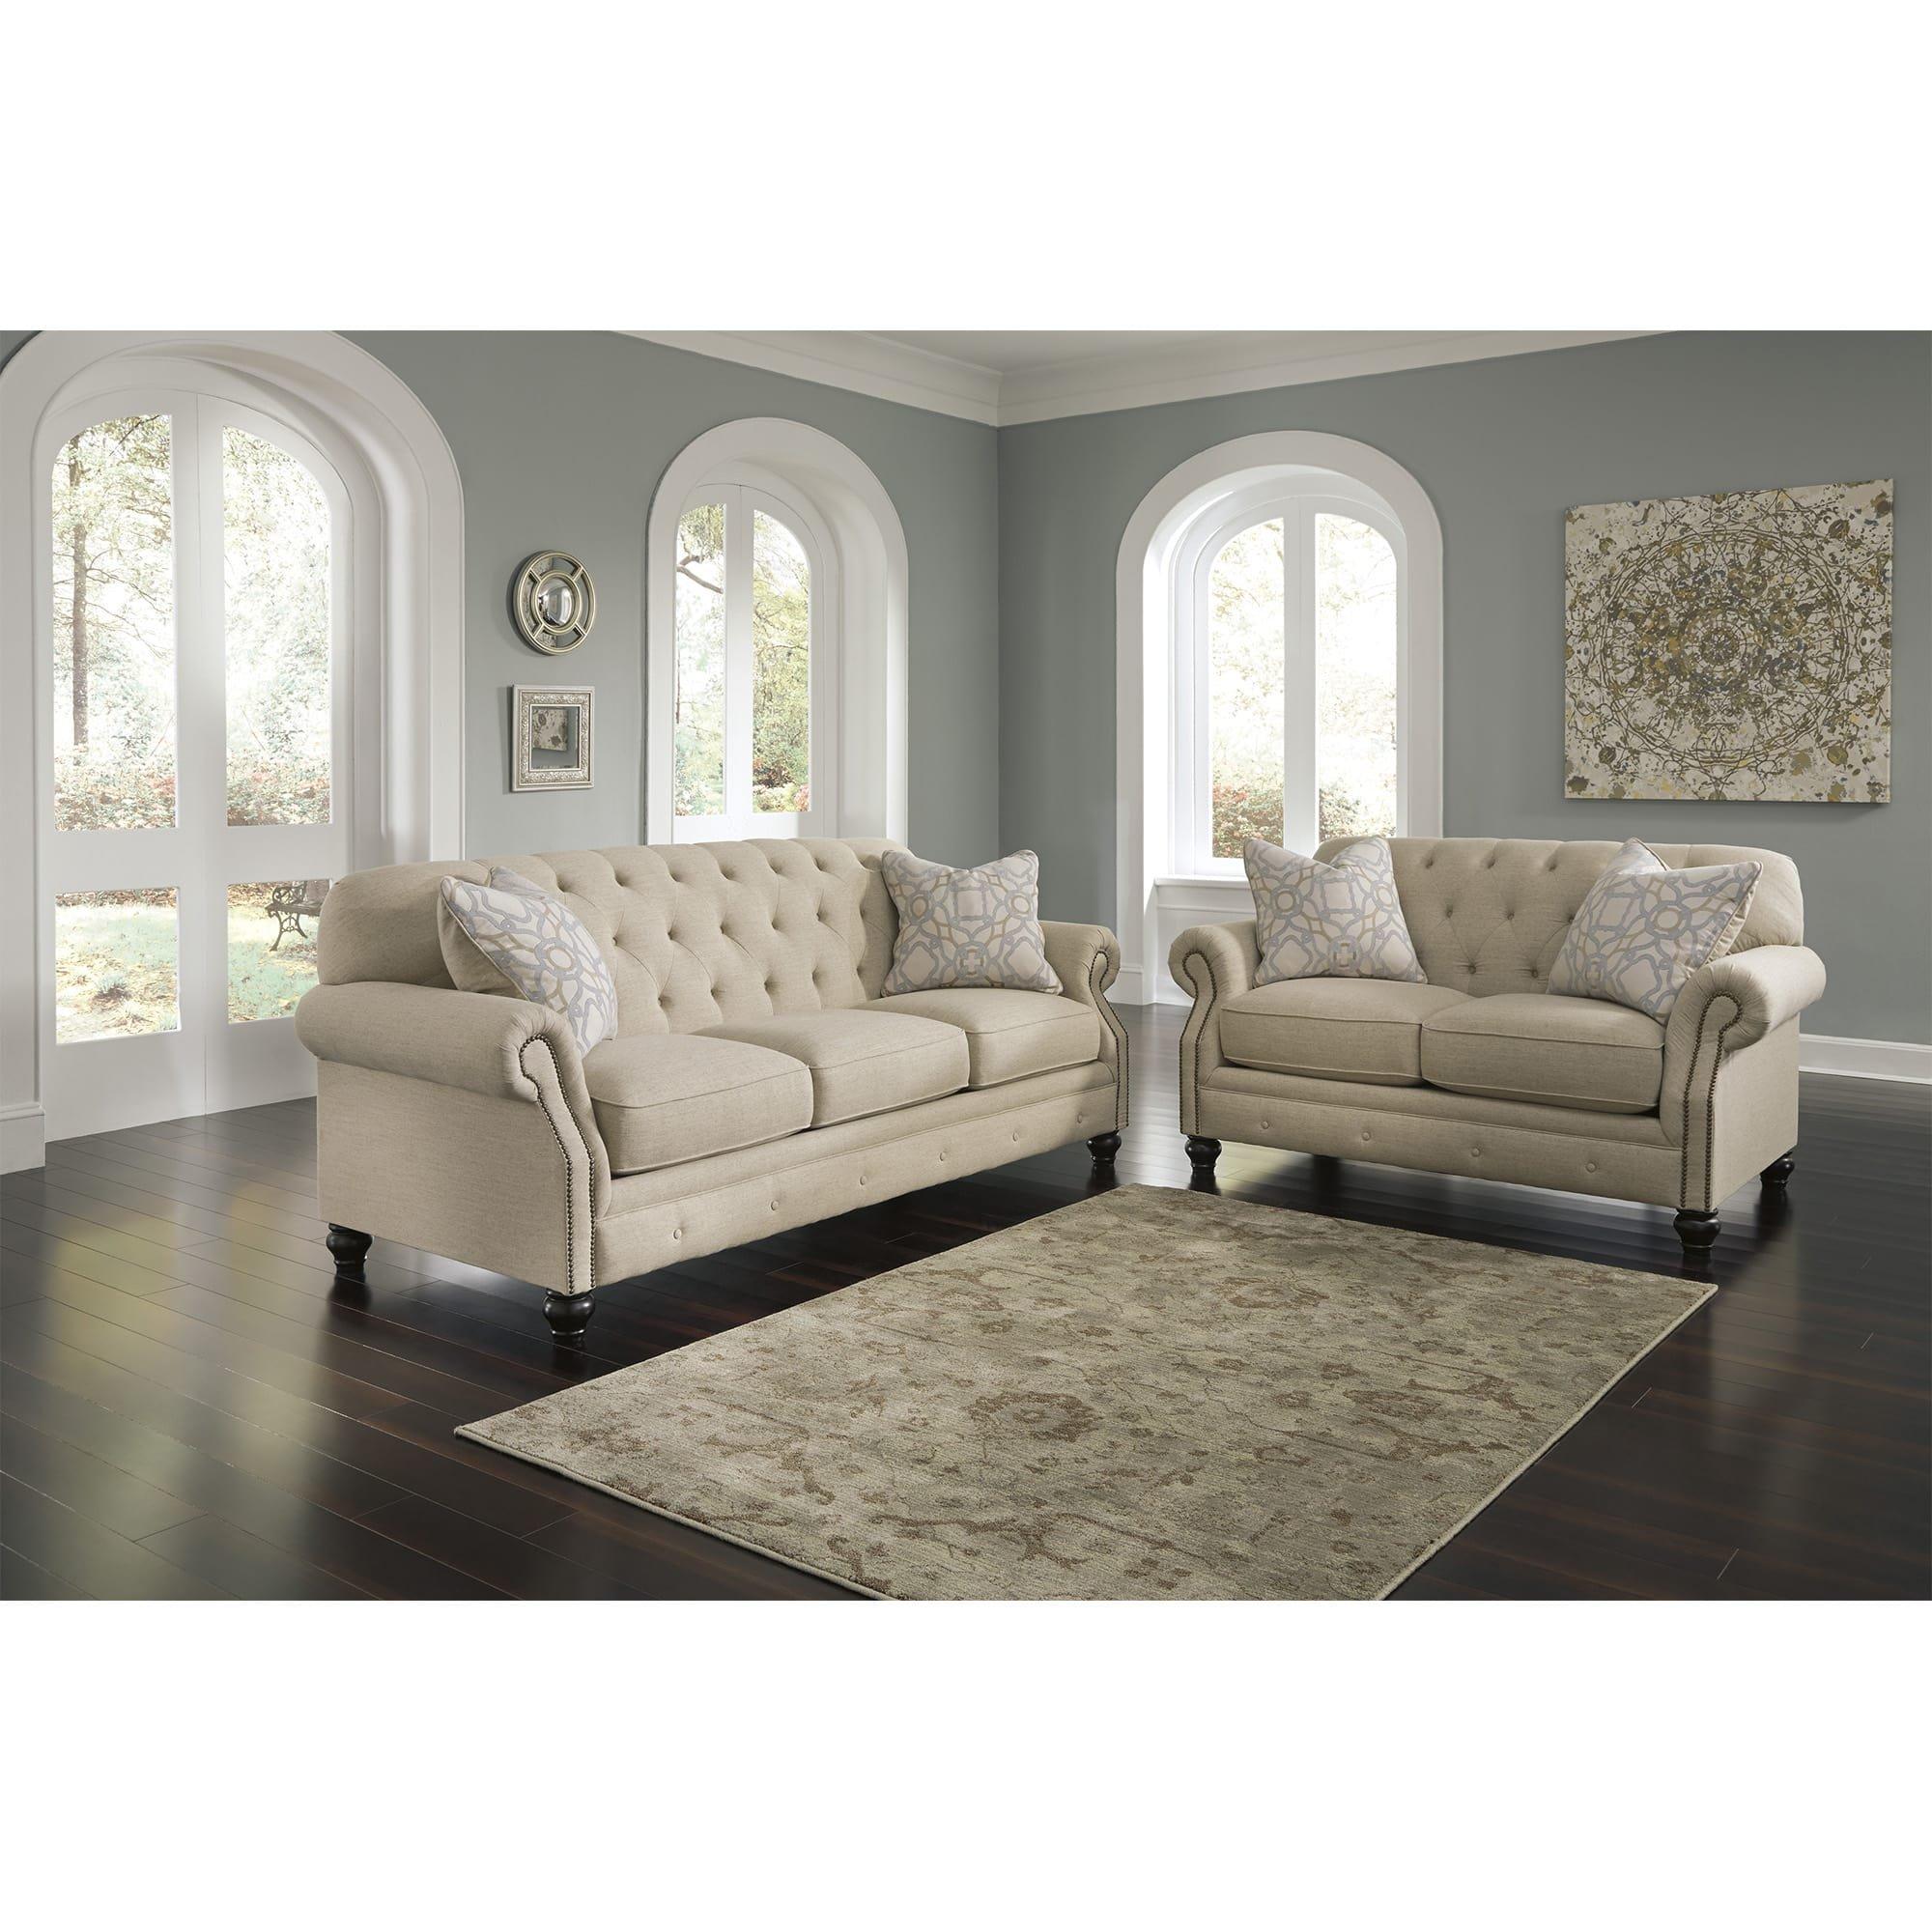 Rent To Own Ashley 2 Piece Keiran Living Room Collection At Aarons Today